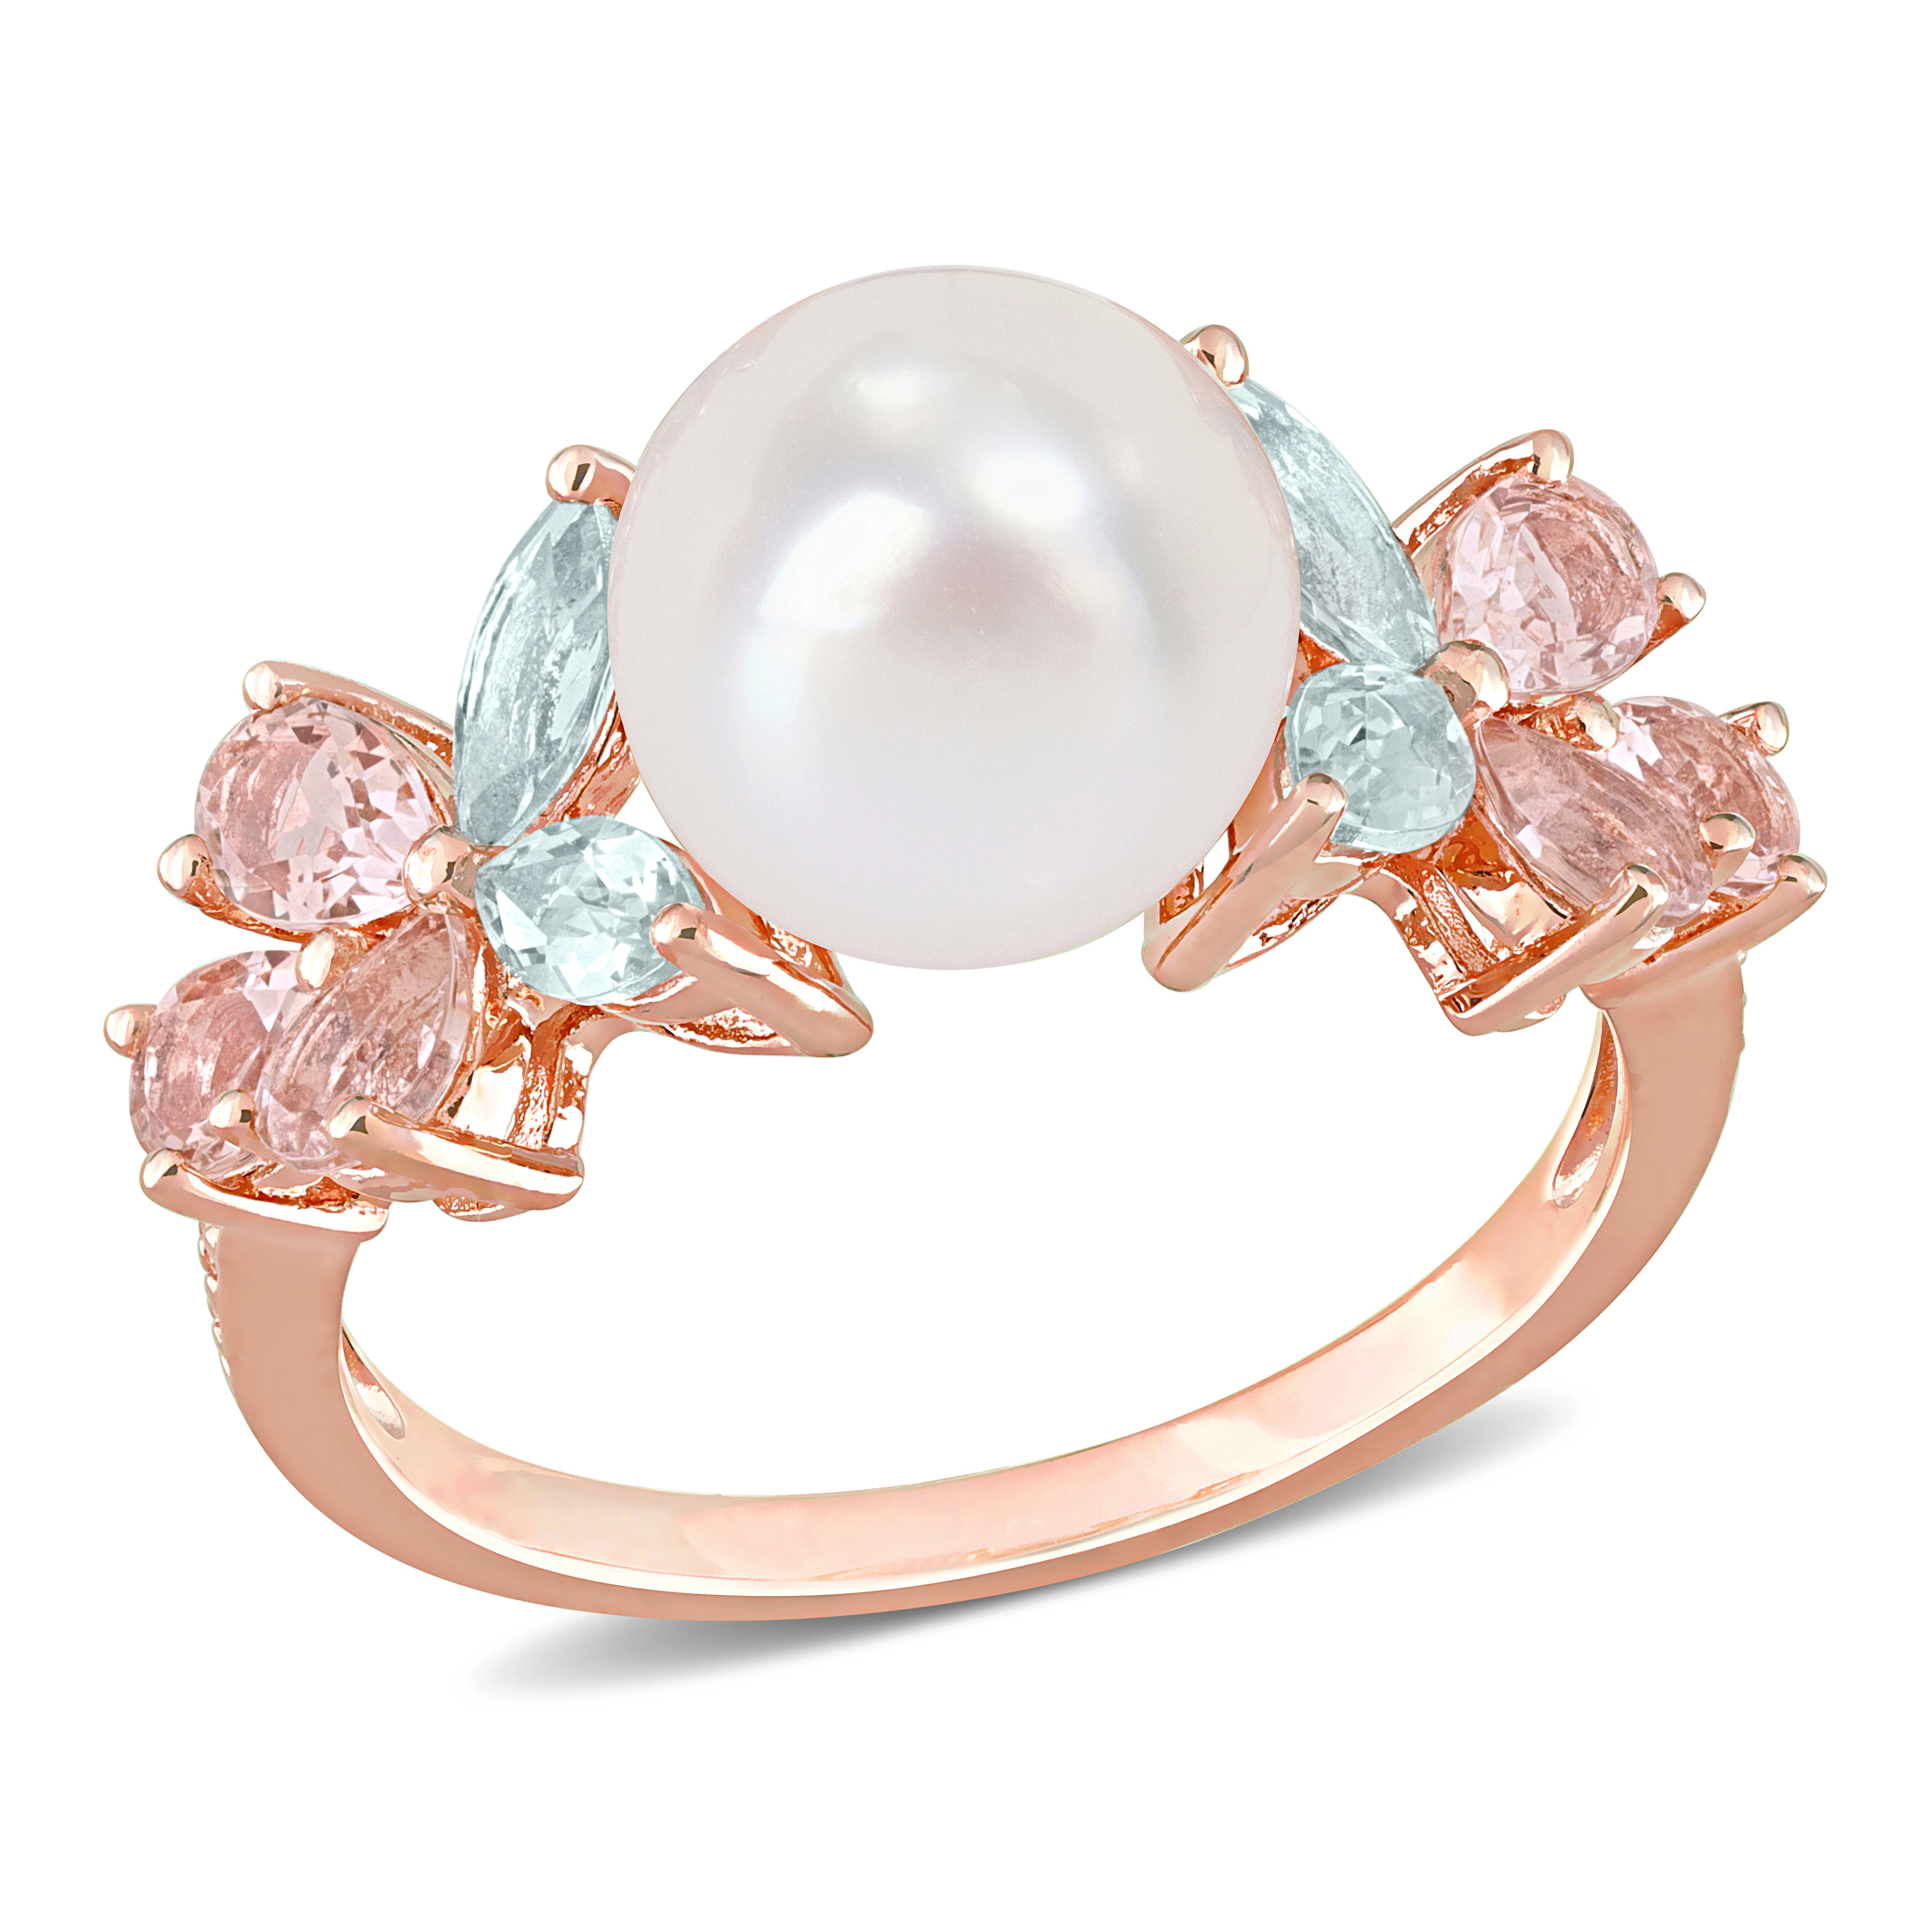 8.5-9MM Cultured Freshwater Pearl and 1 2/5 CT TGW Morganite Aquamarine White Topaz Cocktail Ring in 18k Rose Gold Plated Sterling Silver